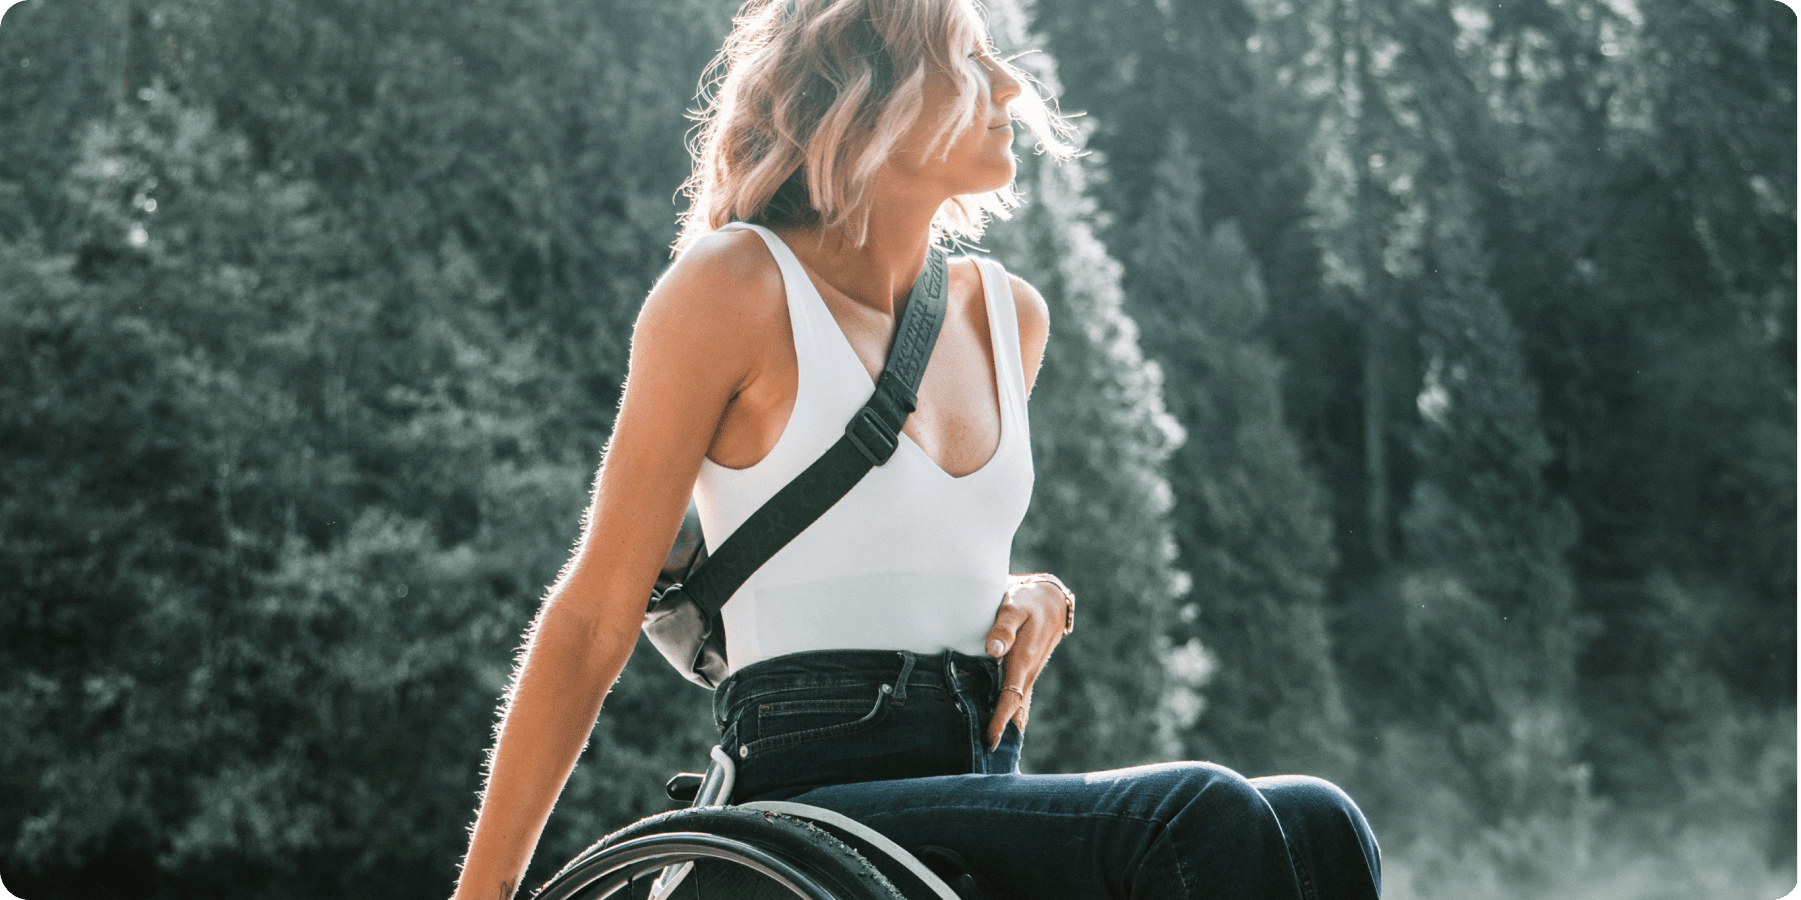 Dynamic disabilities & periods